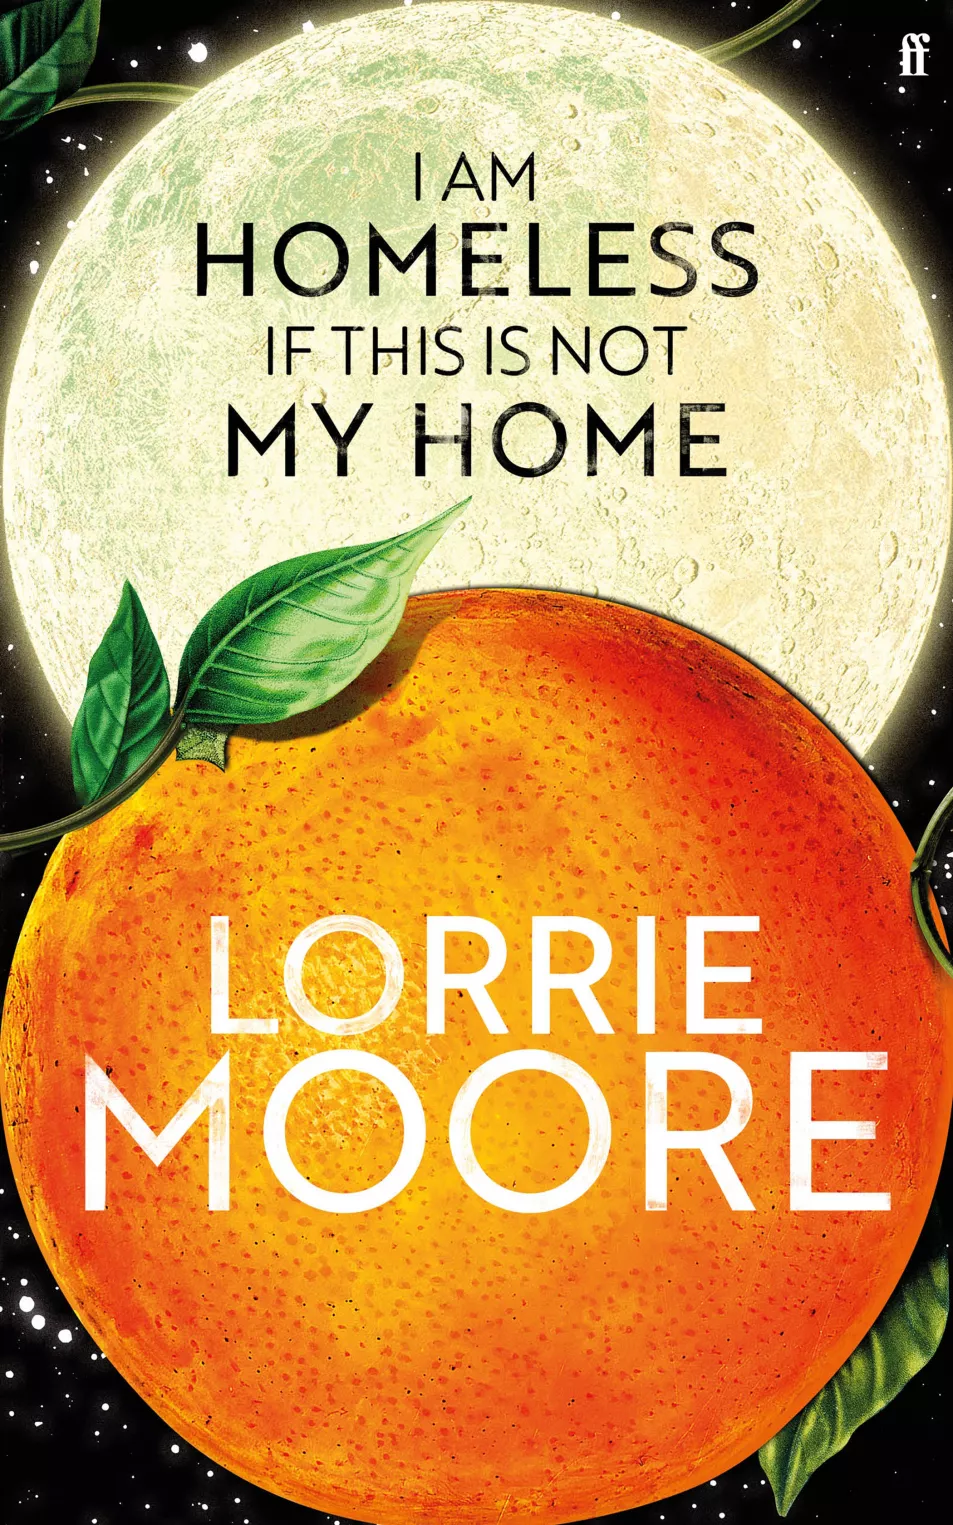  I Am Homeless If This Is Not My Home by Lorrie Moore